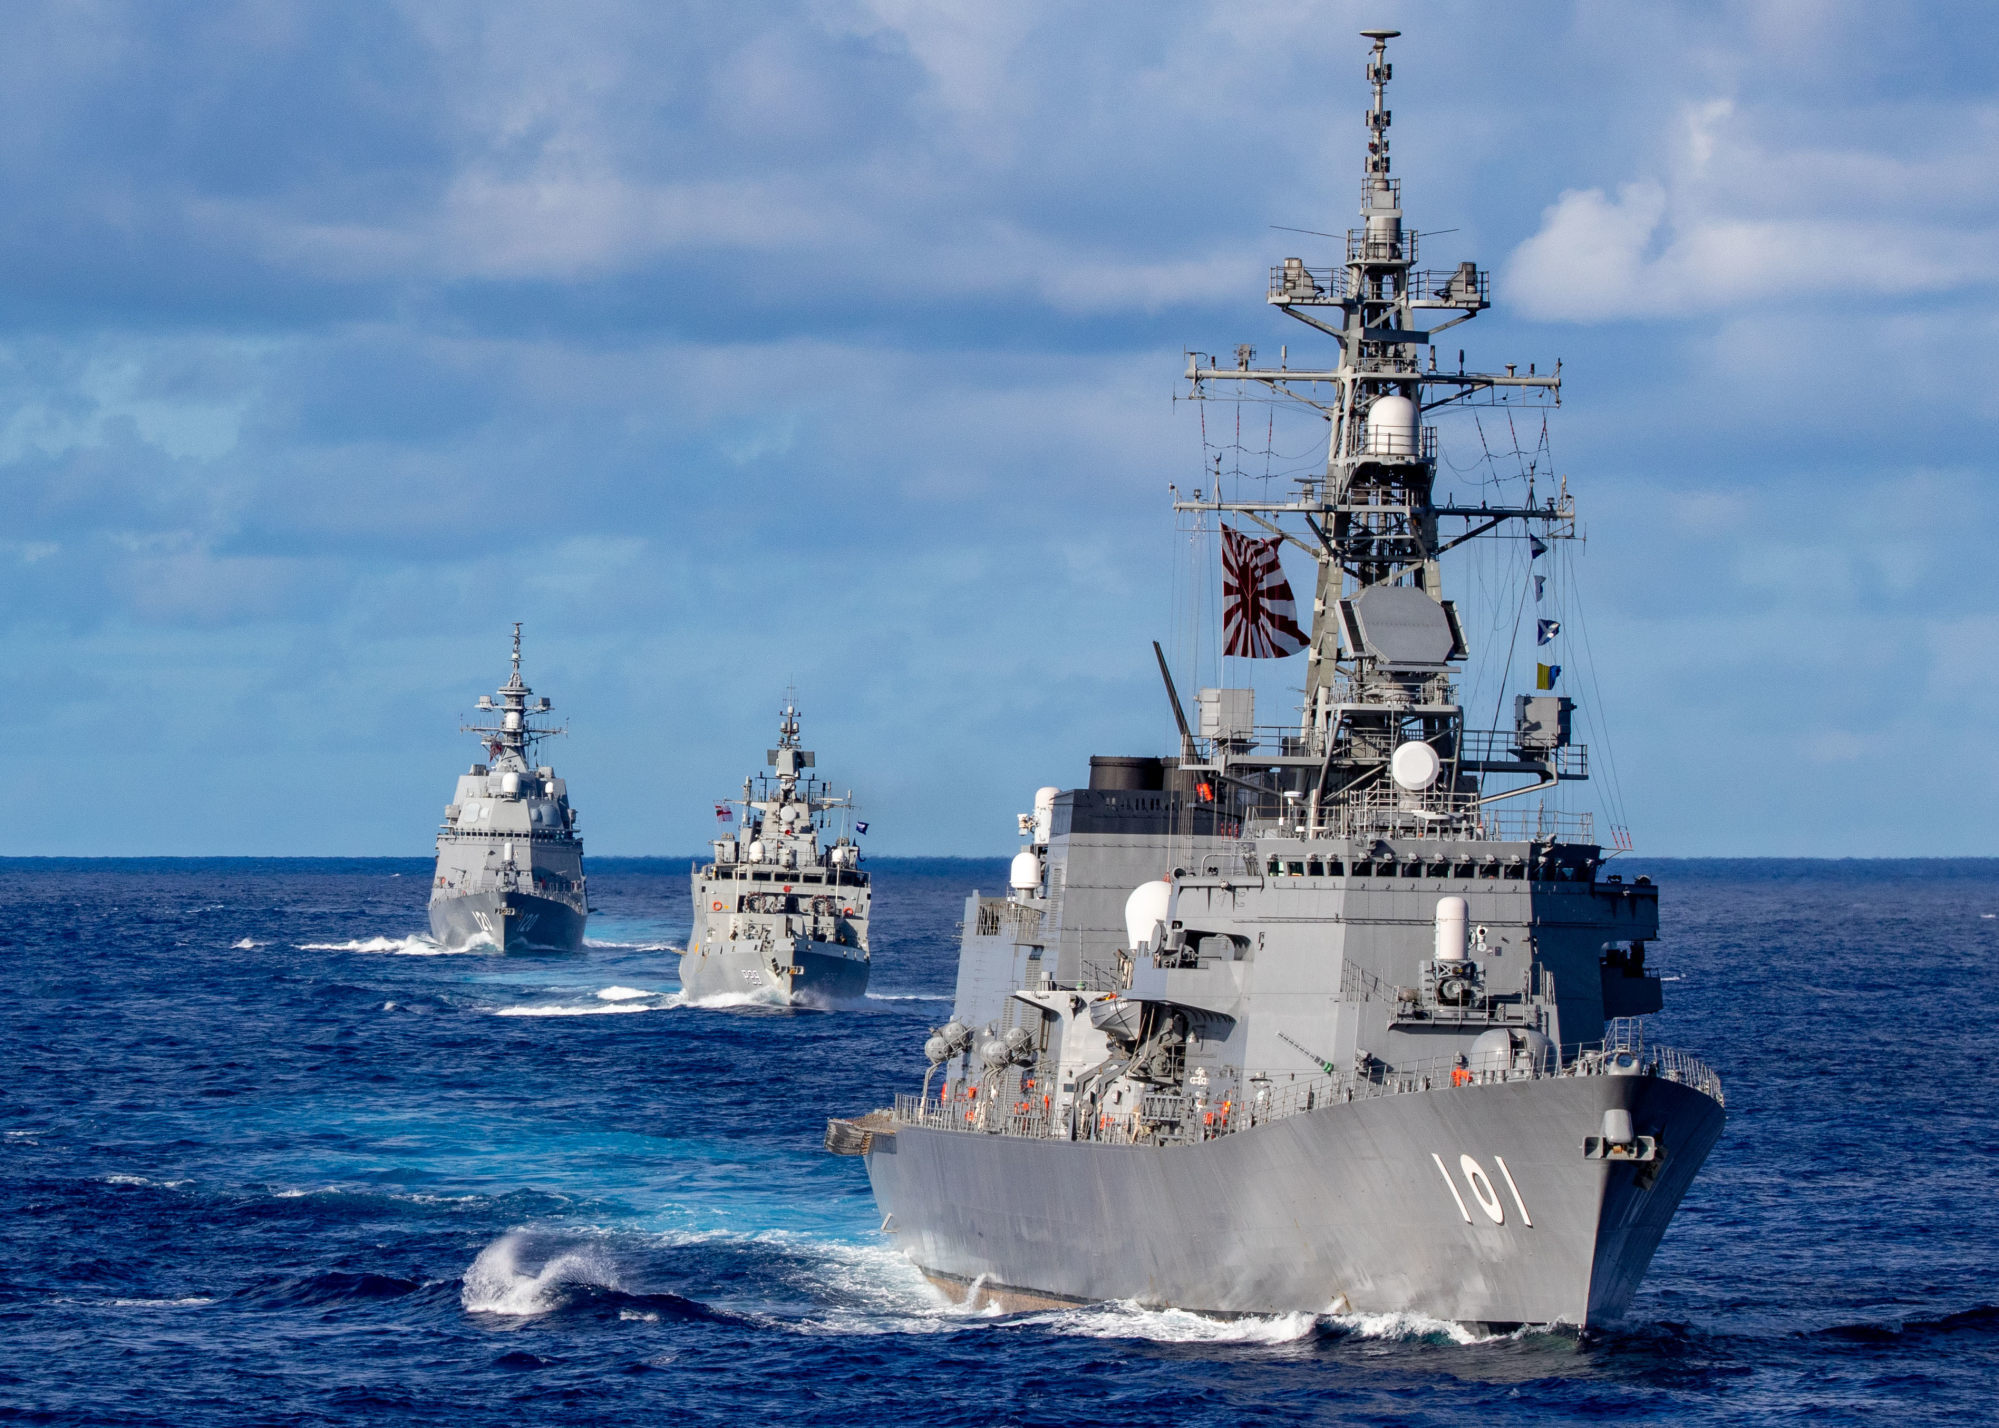 Japanese, Indian and Australian ships take part in a joint exercise. Photo: Handout